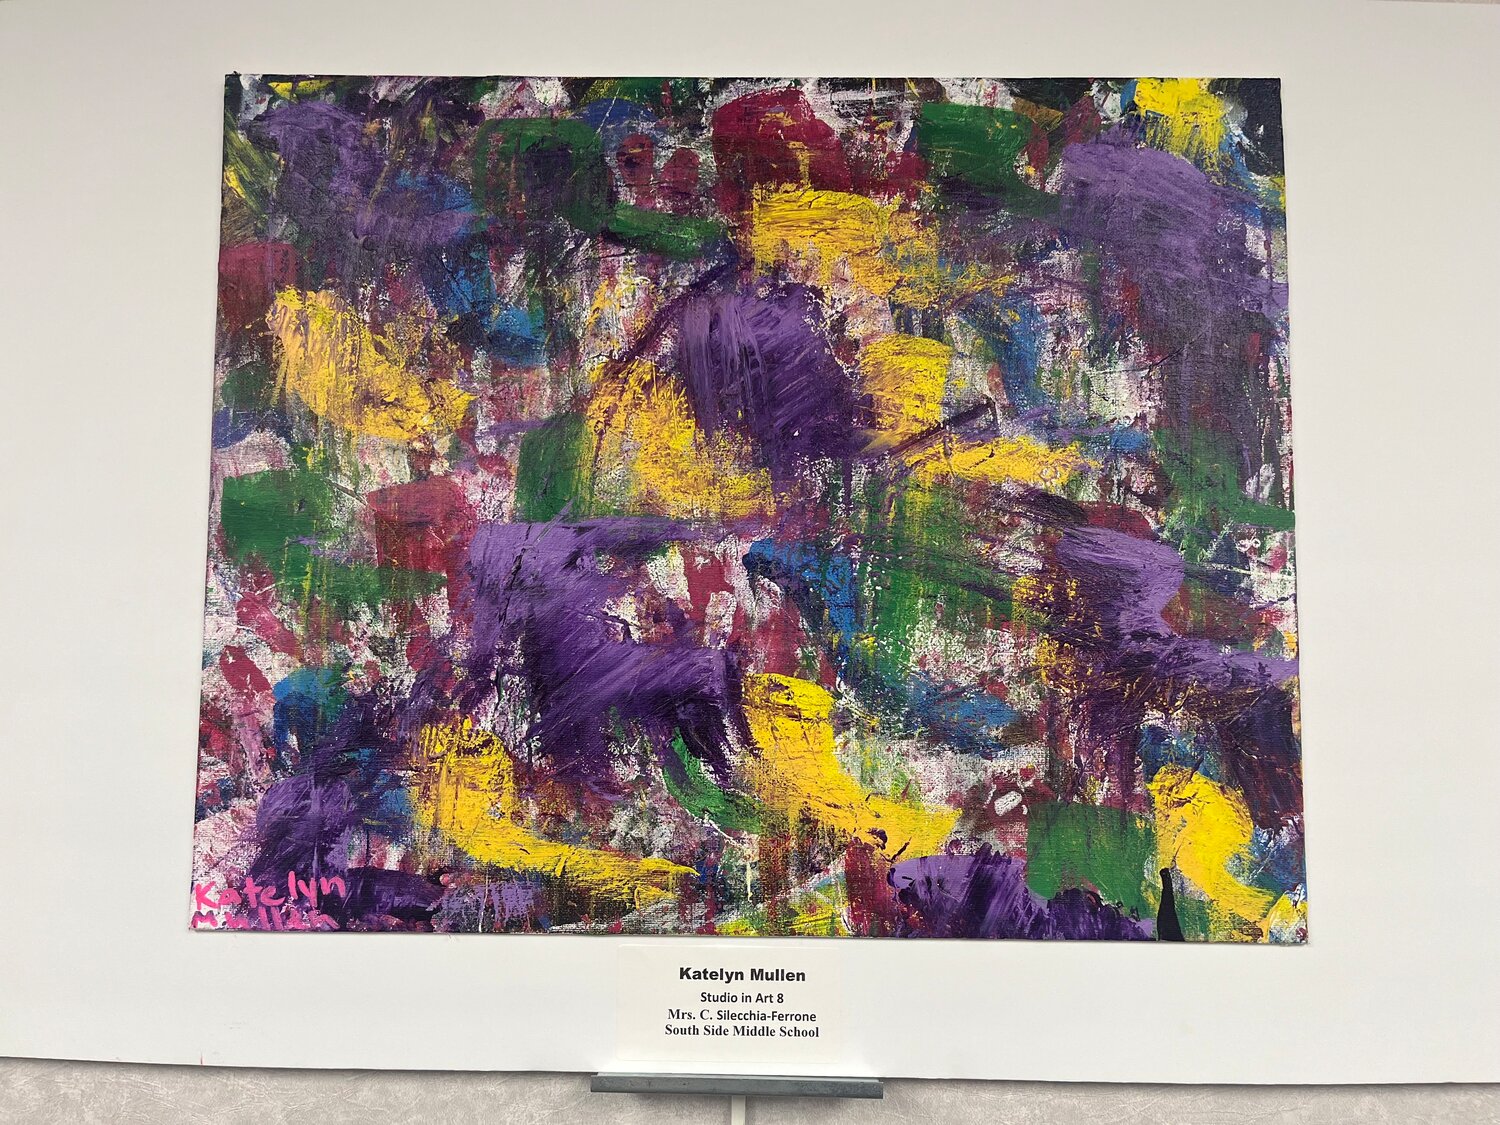 South Side Middle School painter Katelyn Mullen explores the use of abstract expressionism with her unique painting on canvas.